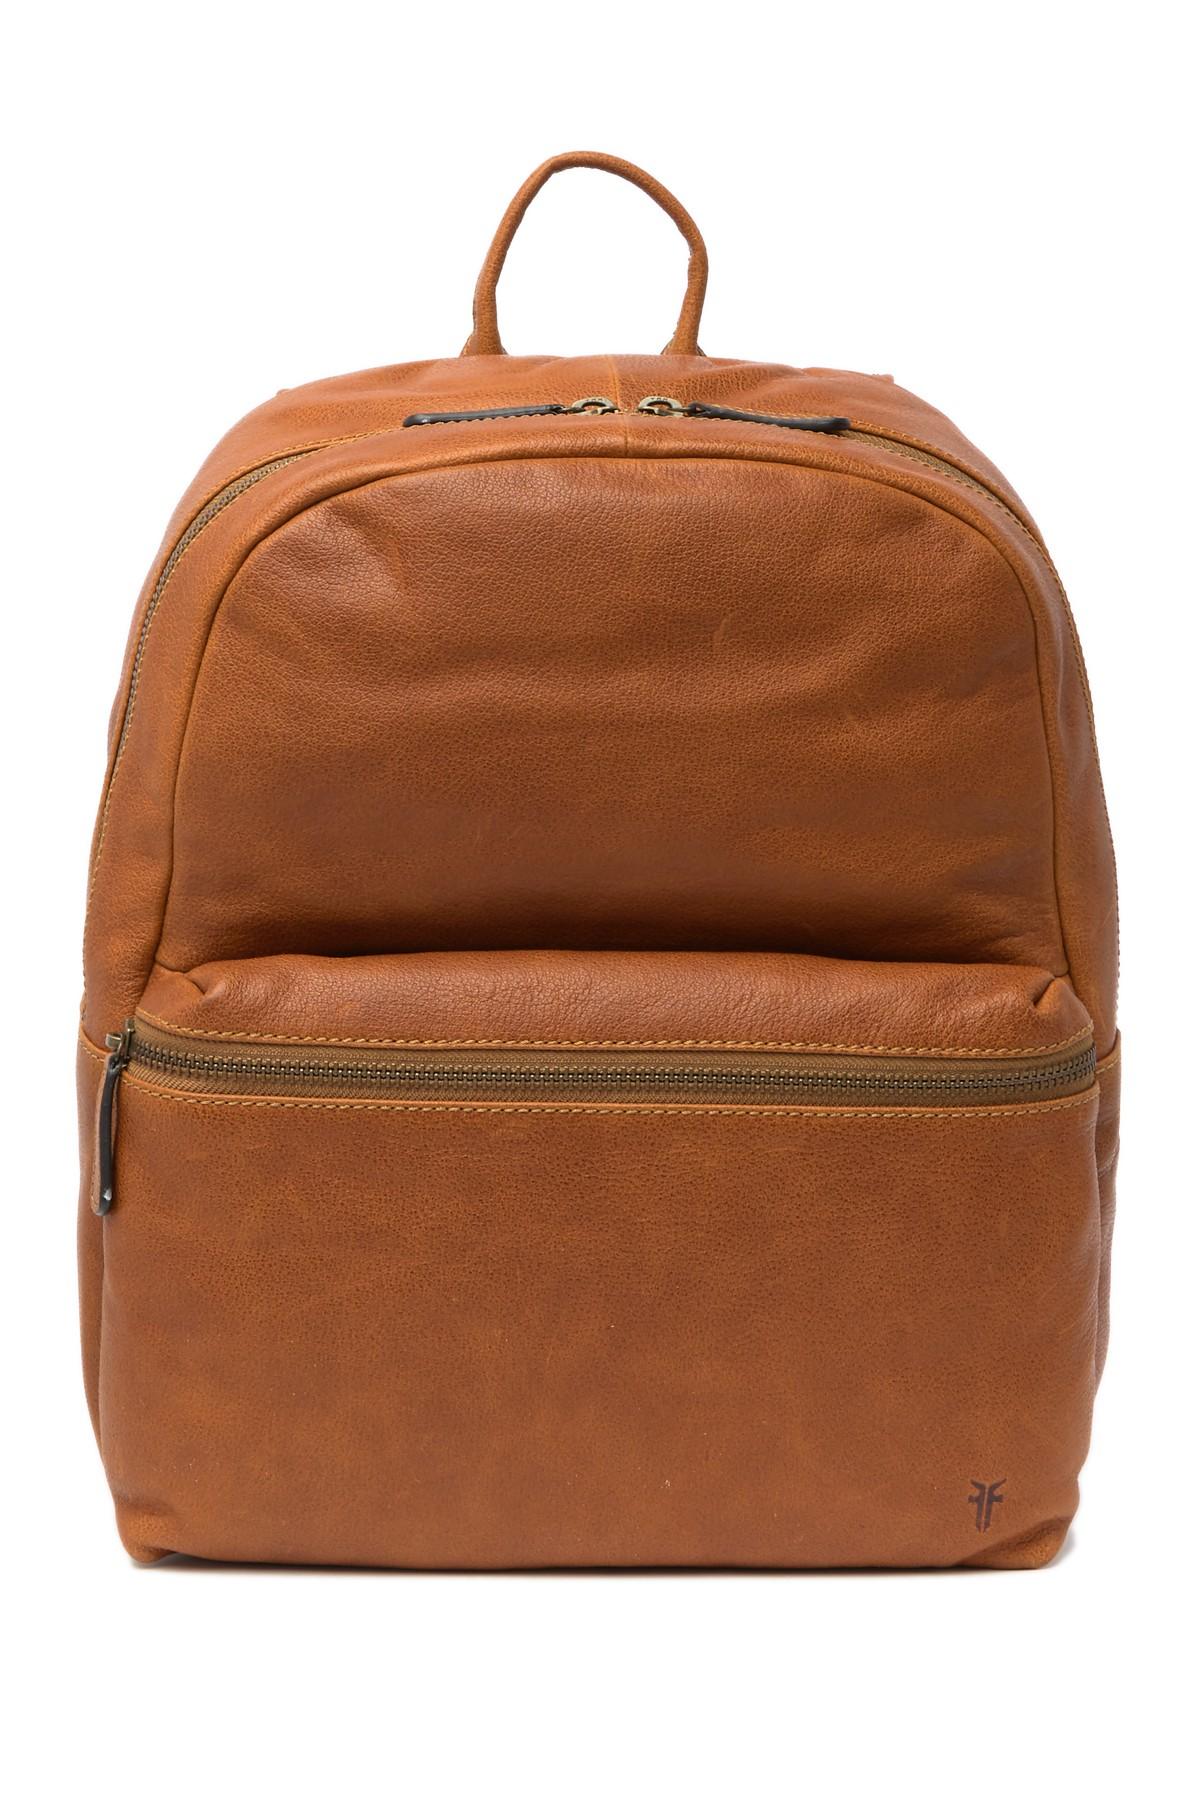 Frye Dylan Leather Backpack in Brown for Men | Lyst